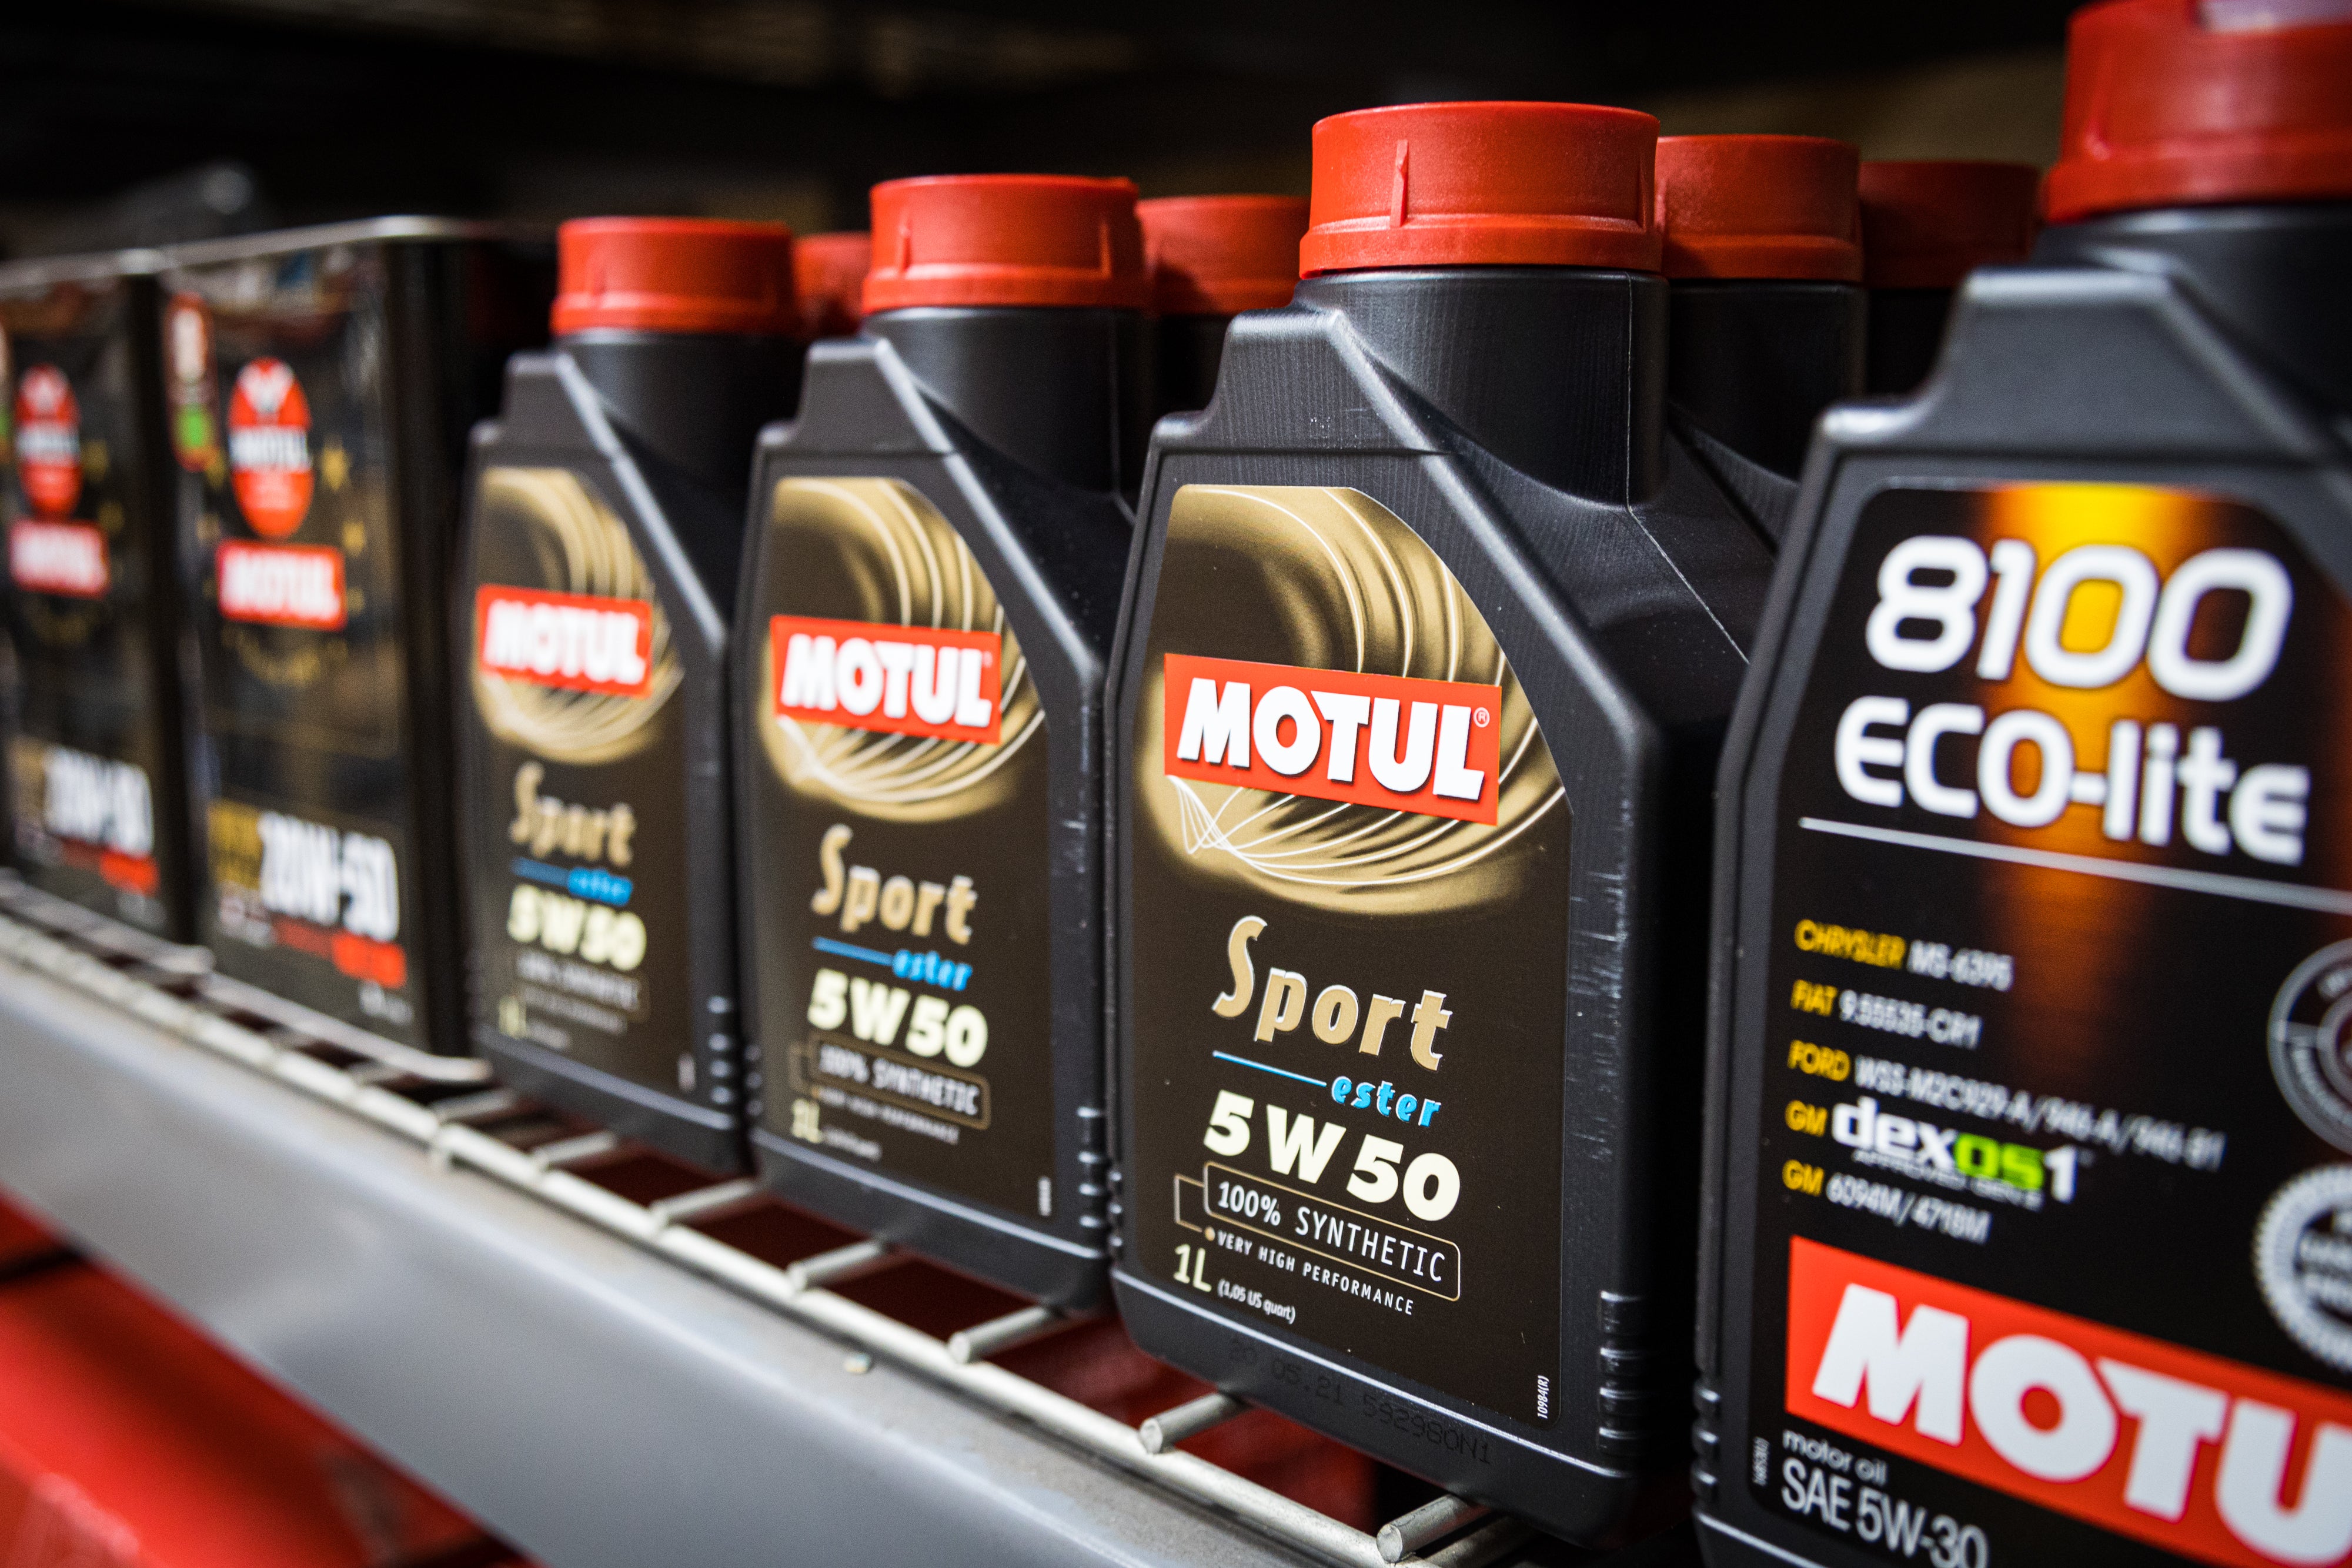 Motul Launches 8100 Power Line for High-Performance Vehicles